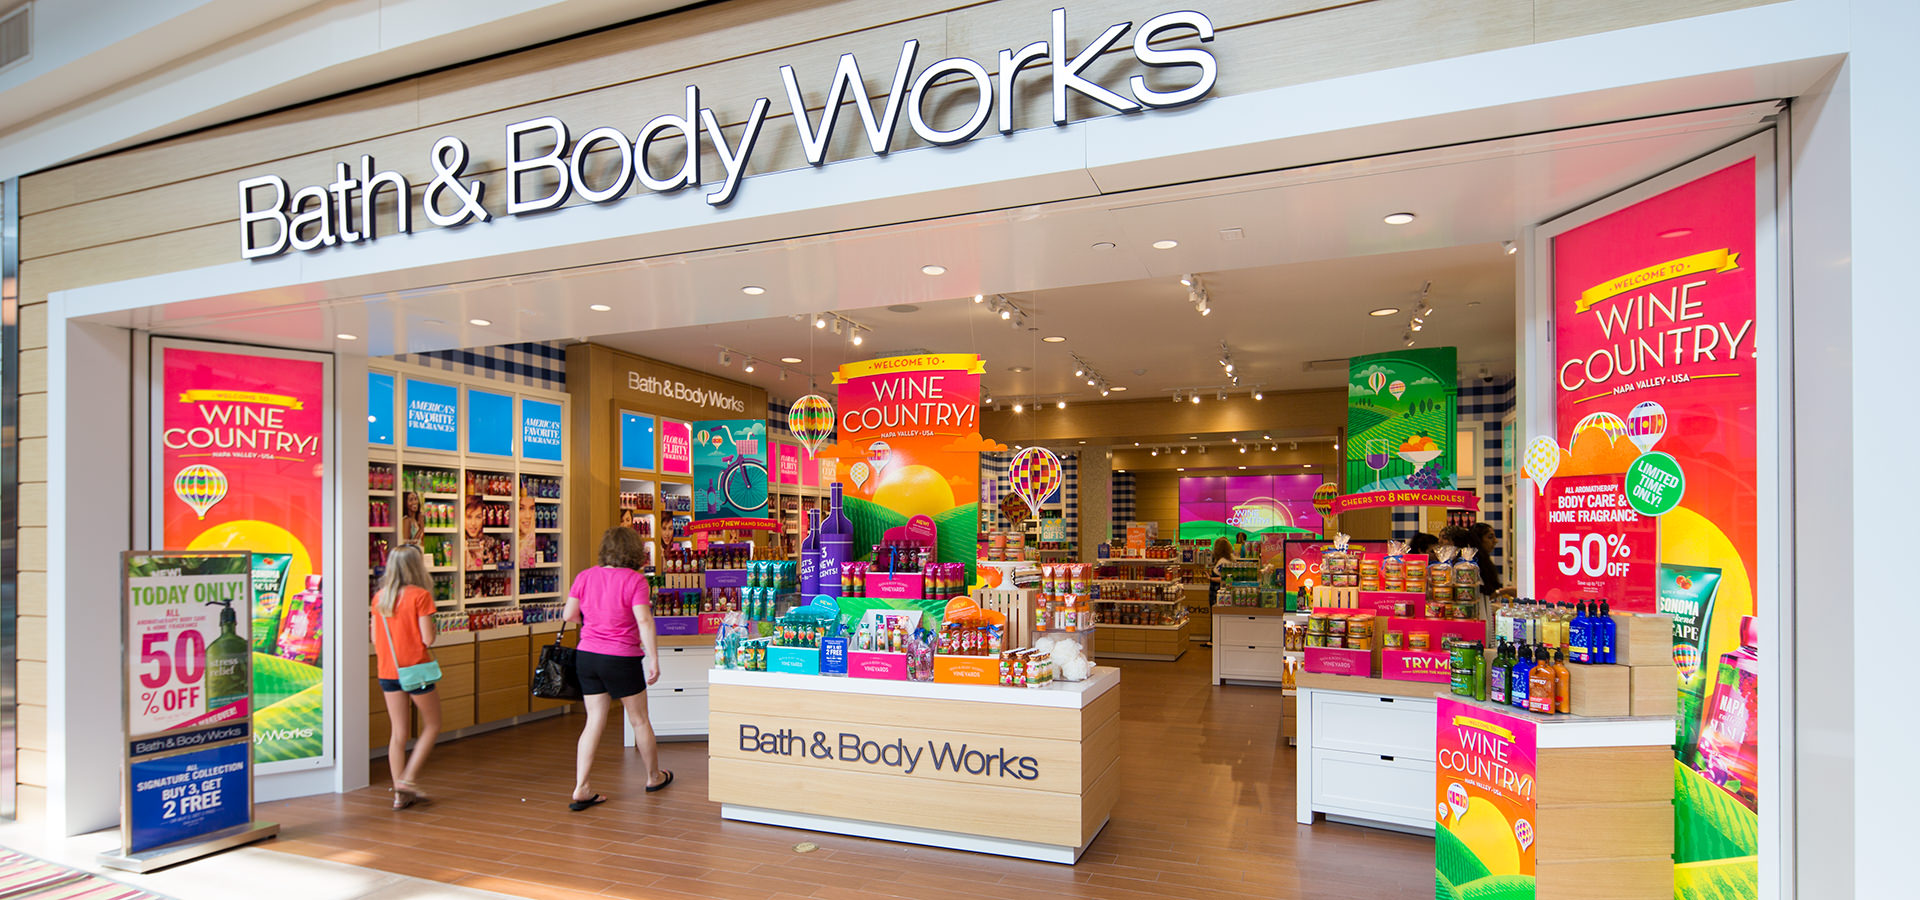 How To Check Your Bath Body Works Gift Card Balance